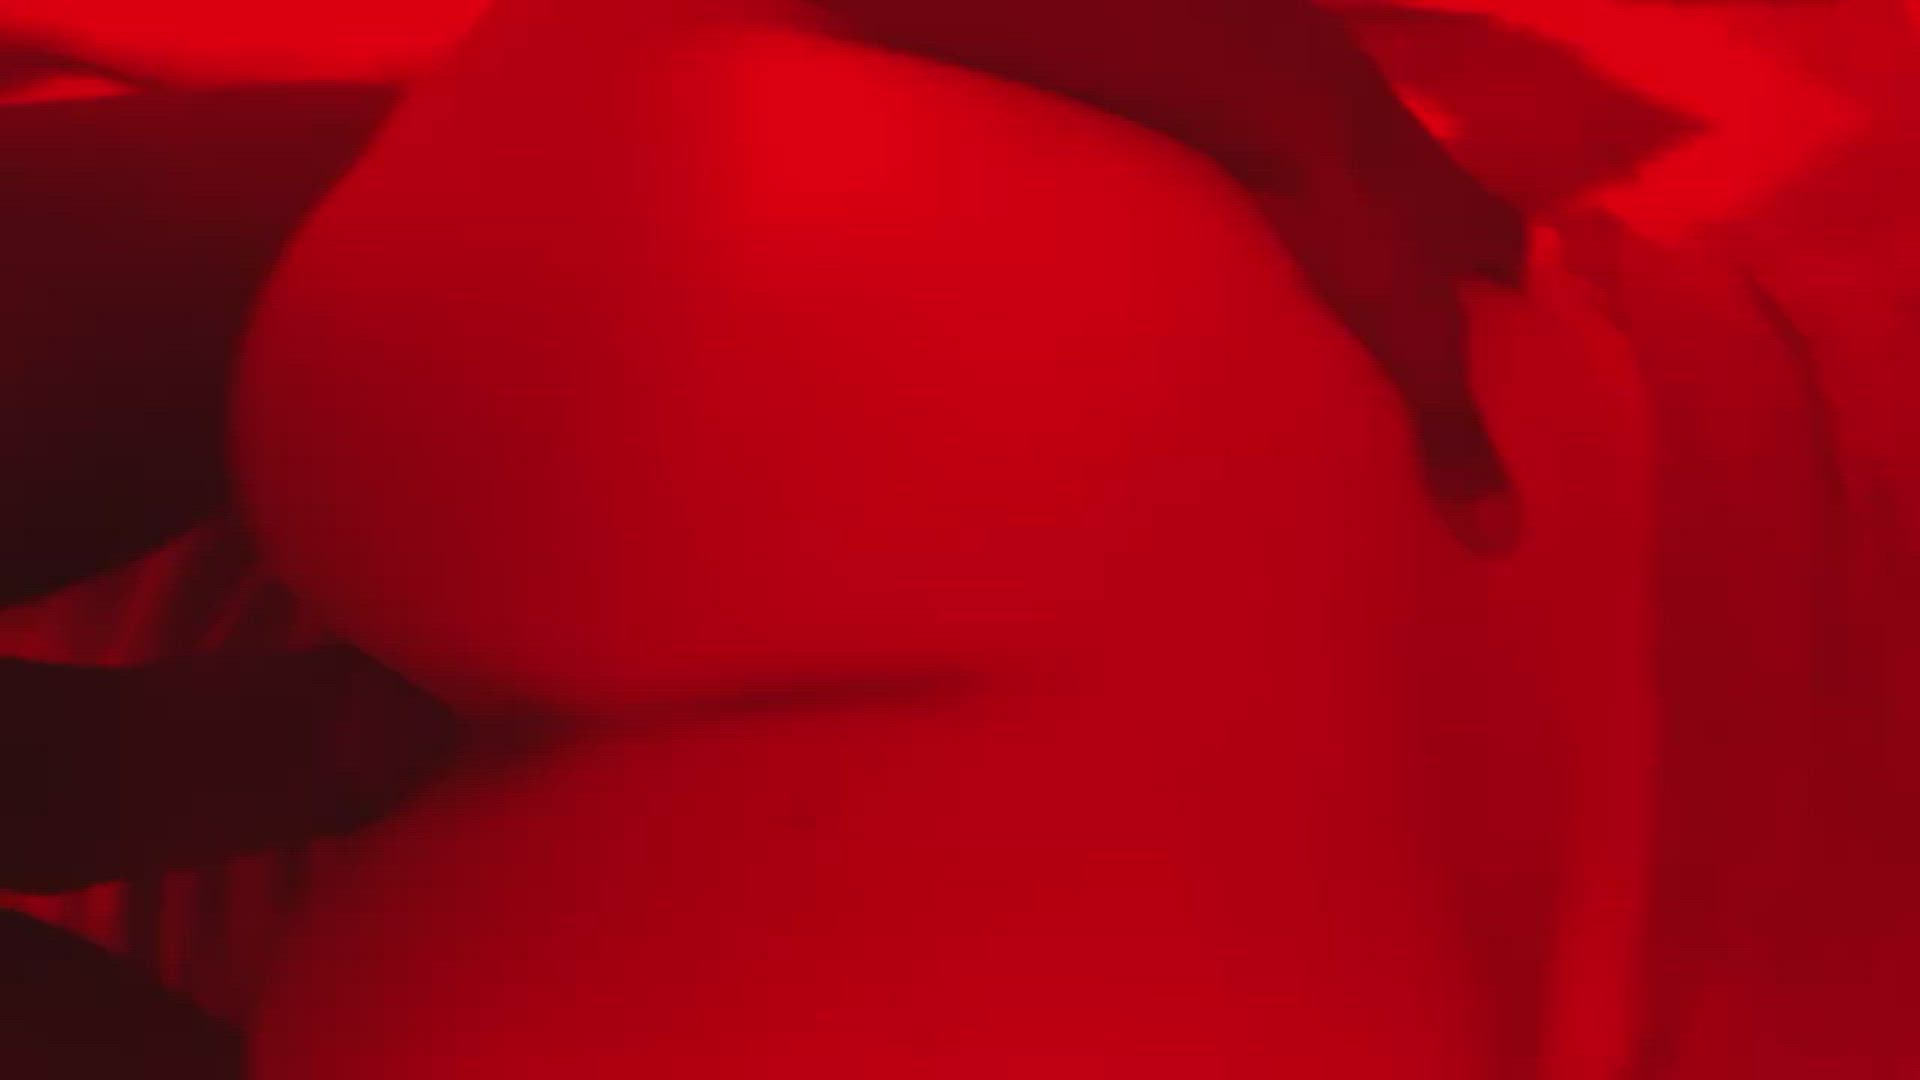 Ass porn video with onlyfans model nicolebabes98 <strong>@nicolebabes98</strong>